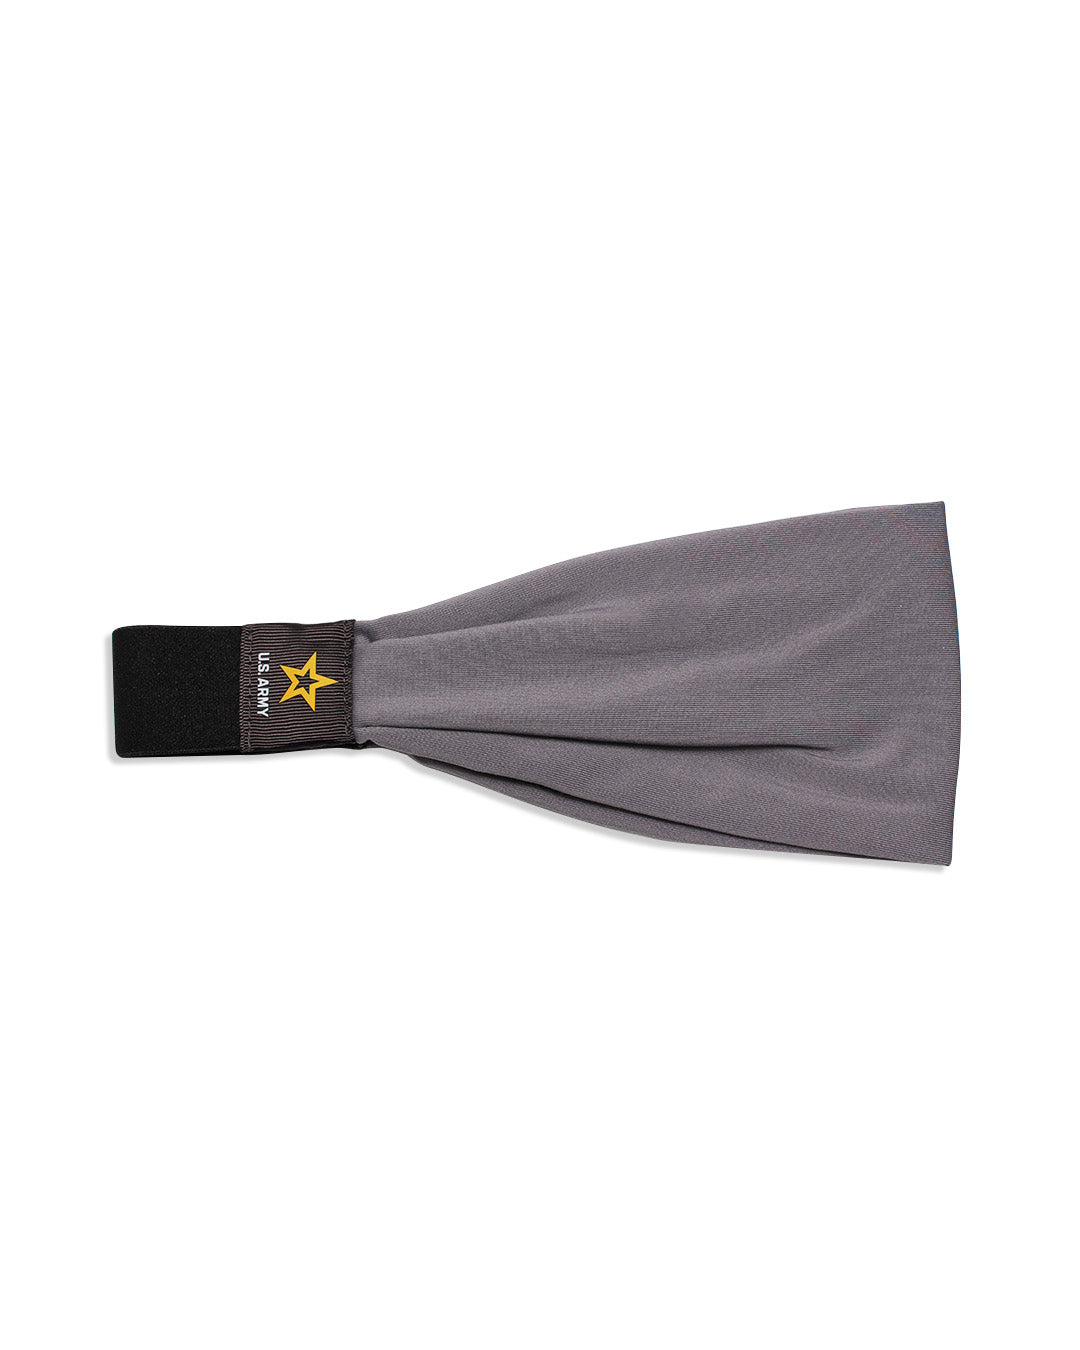 U.S. Army Accelerate Athletic Headband | BANDED Hair Accessories